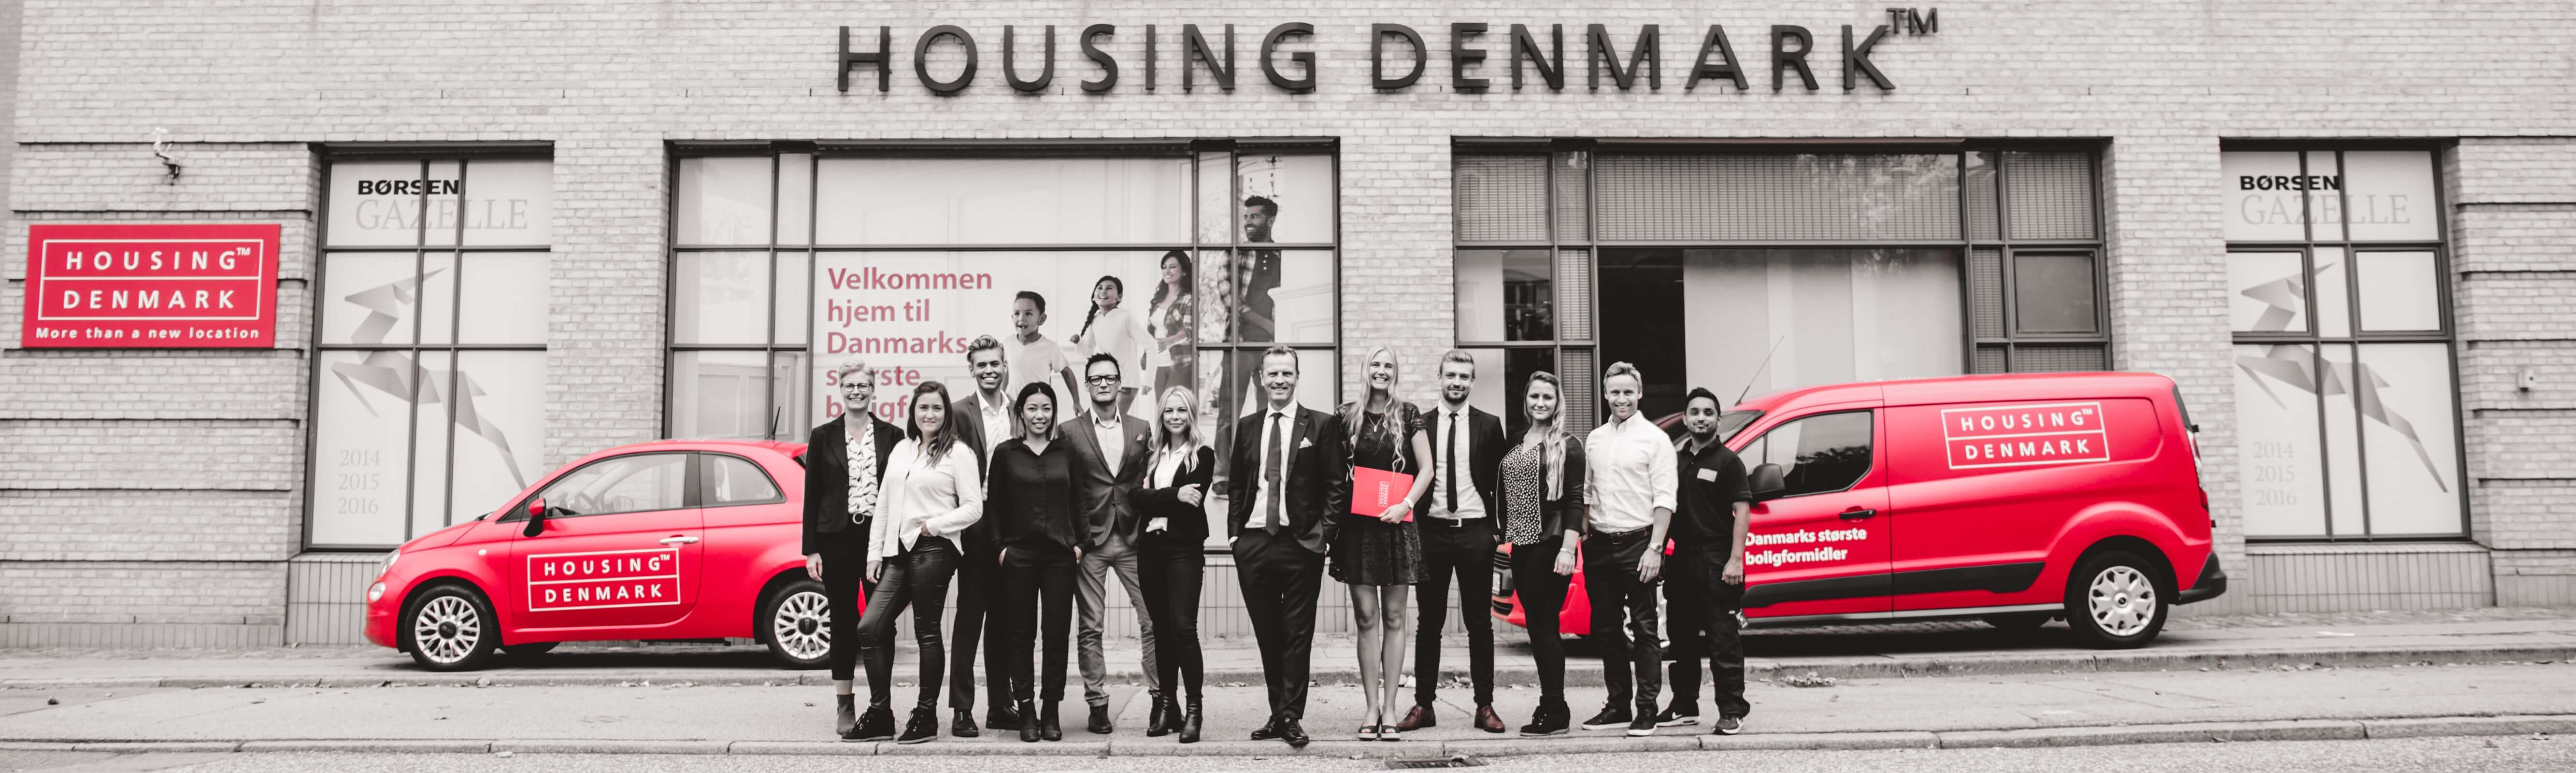 Housing Denmark Services is an independent success